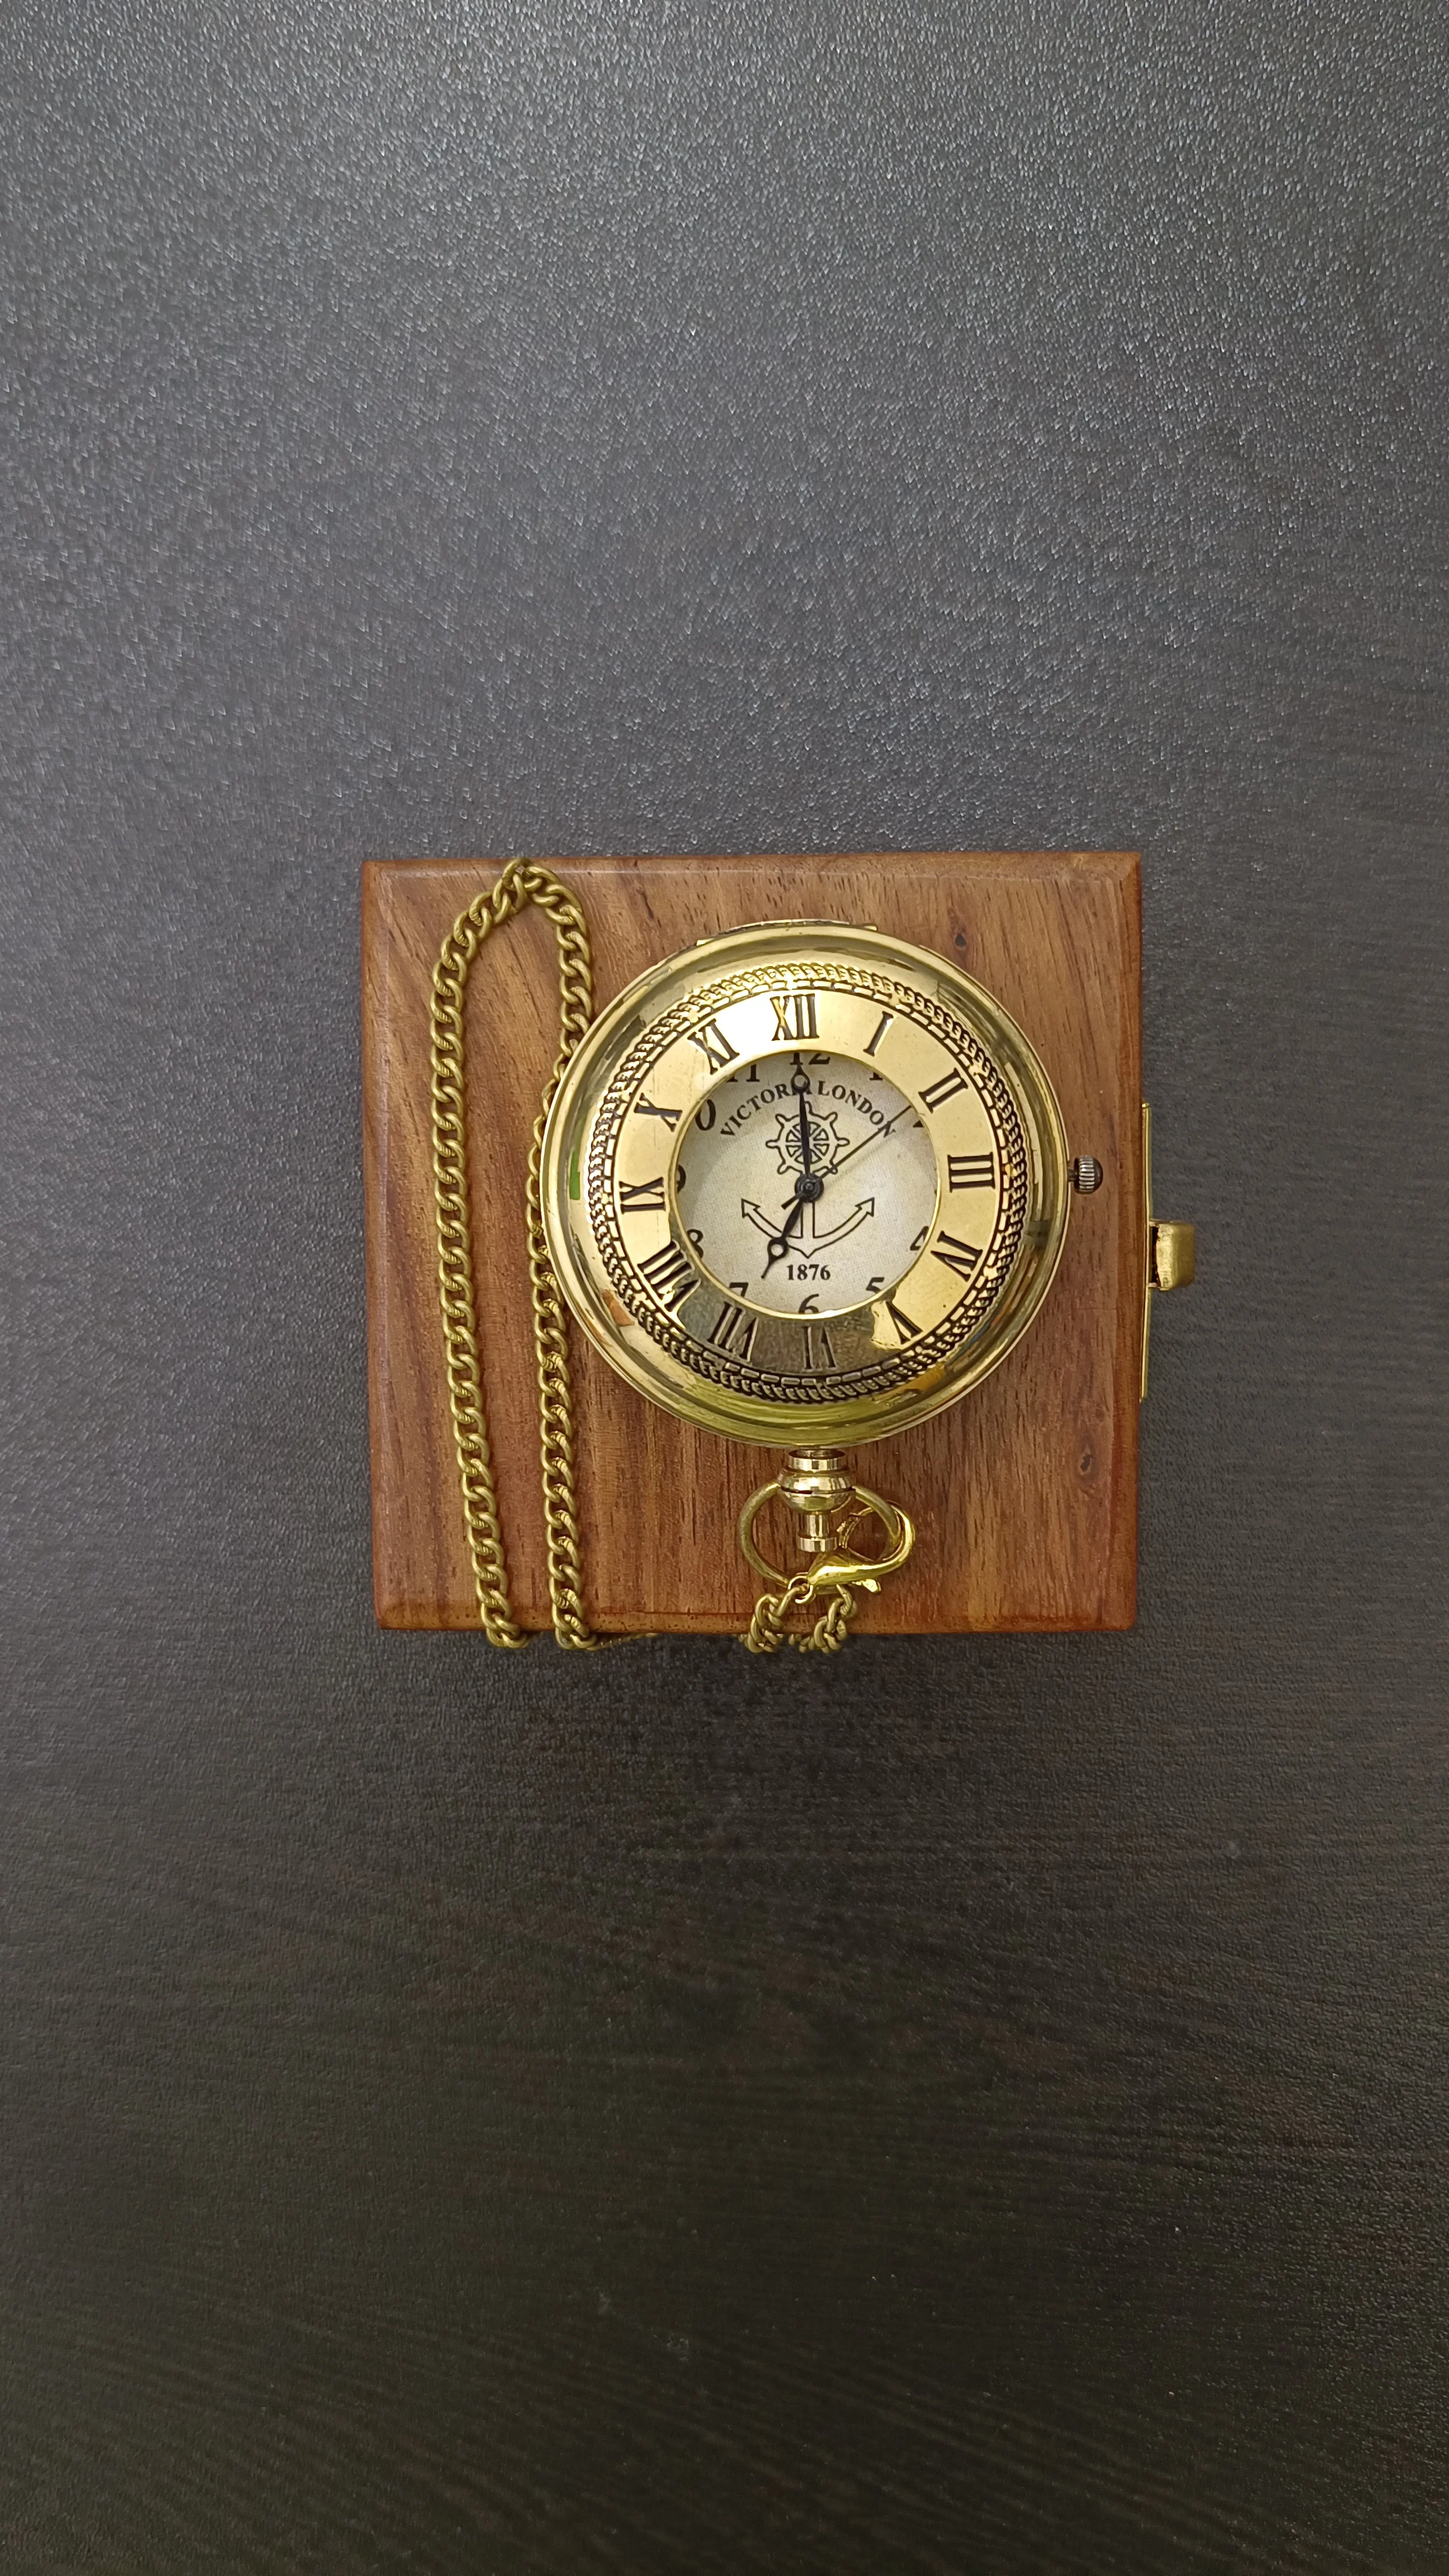 Best Brass Pocket Watch Key Ring Maritime Working Vintage Look Handmade With Push Button Wooden Box Selling For Exports